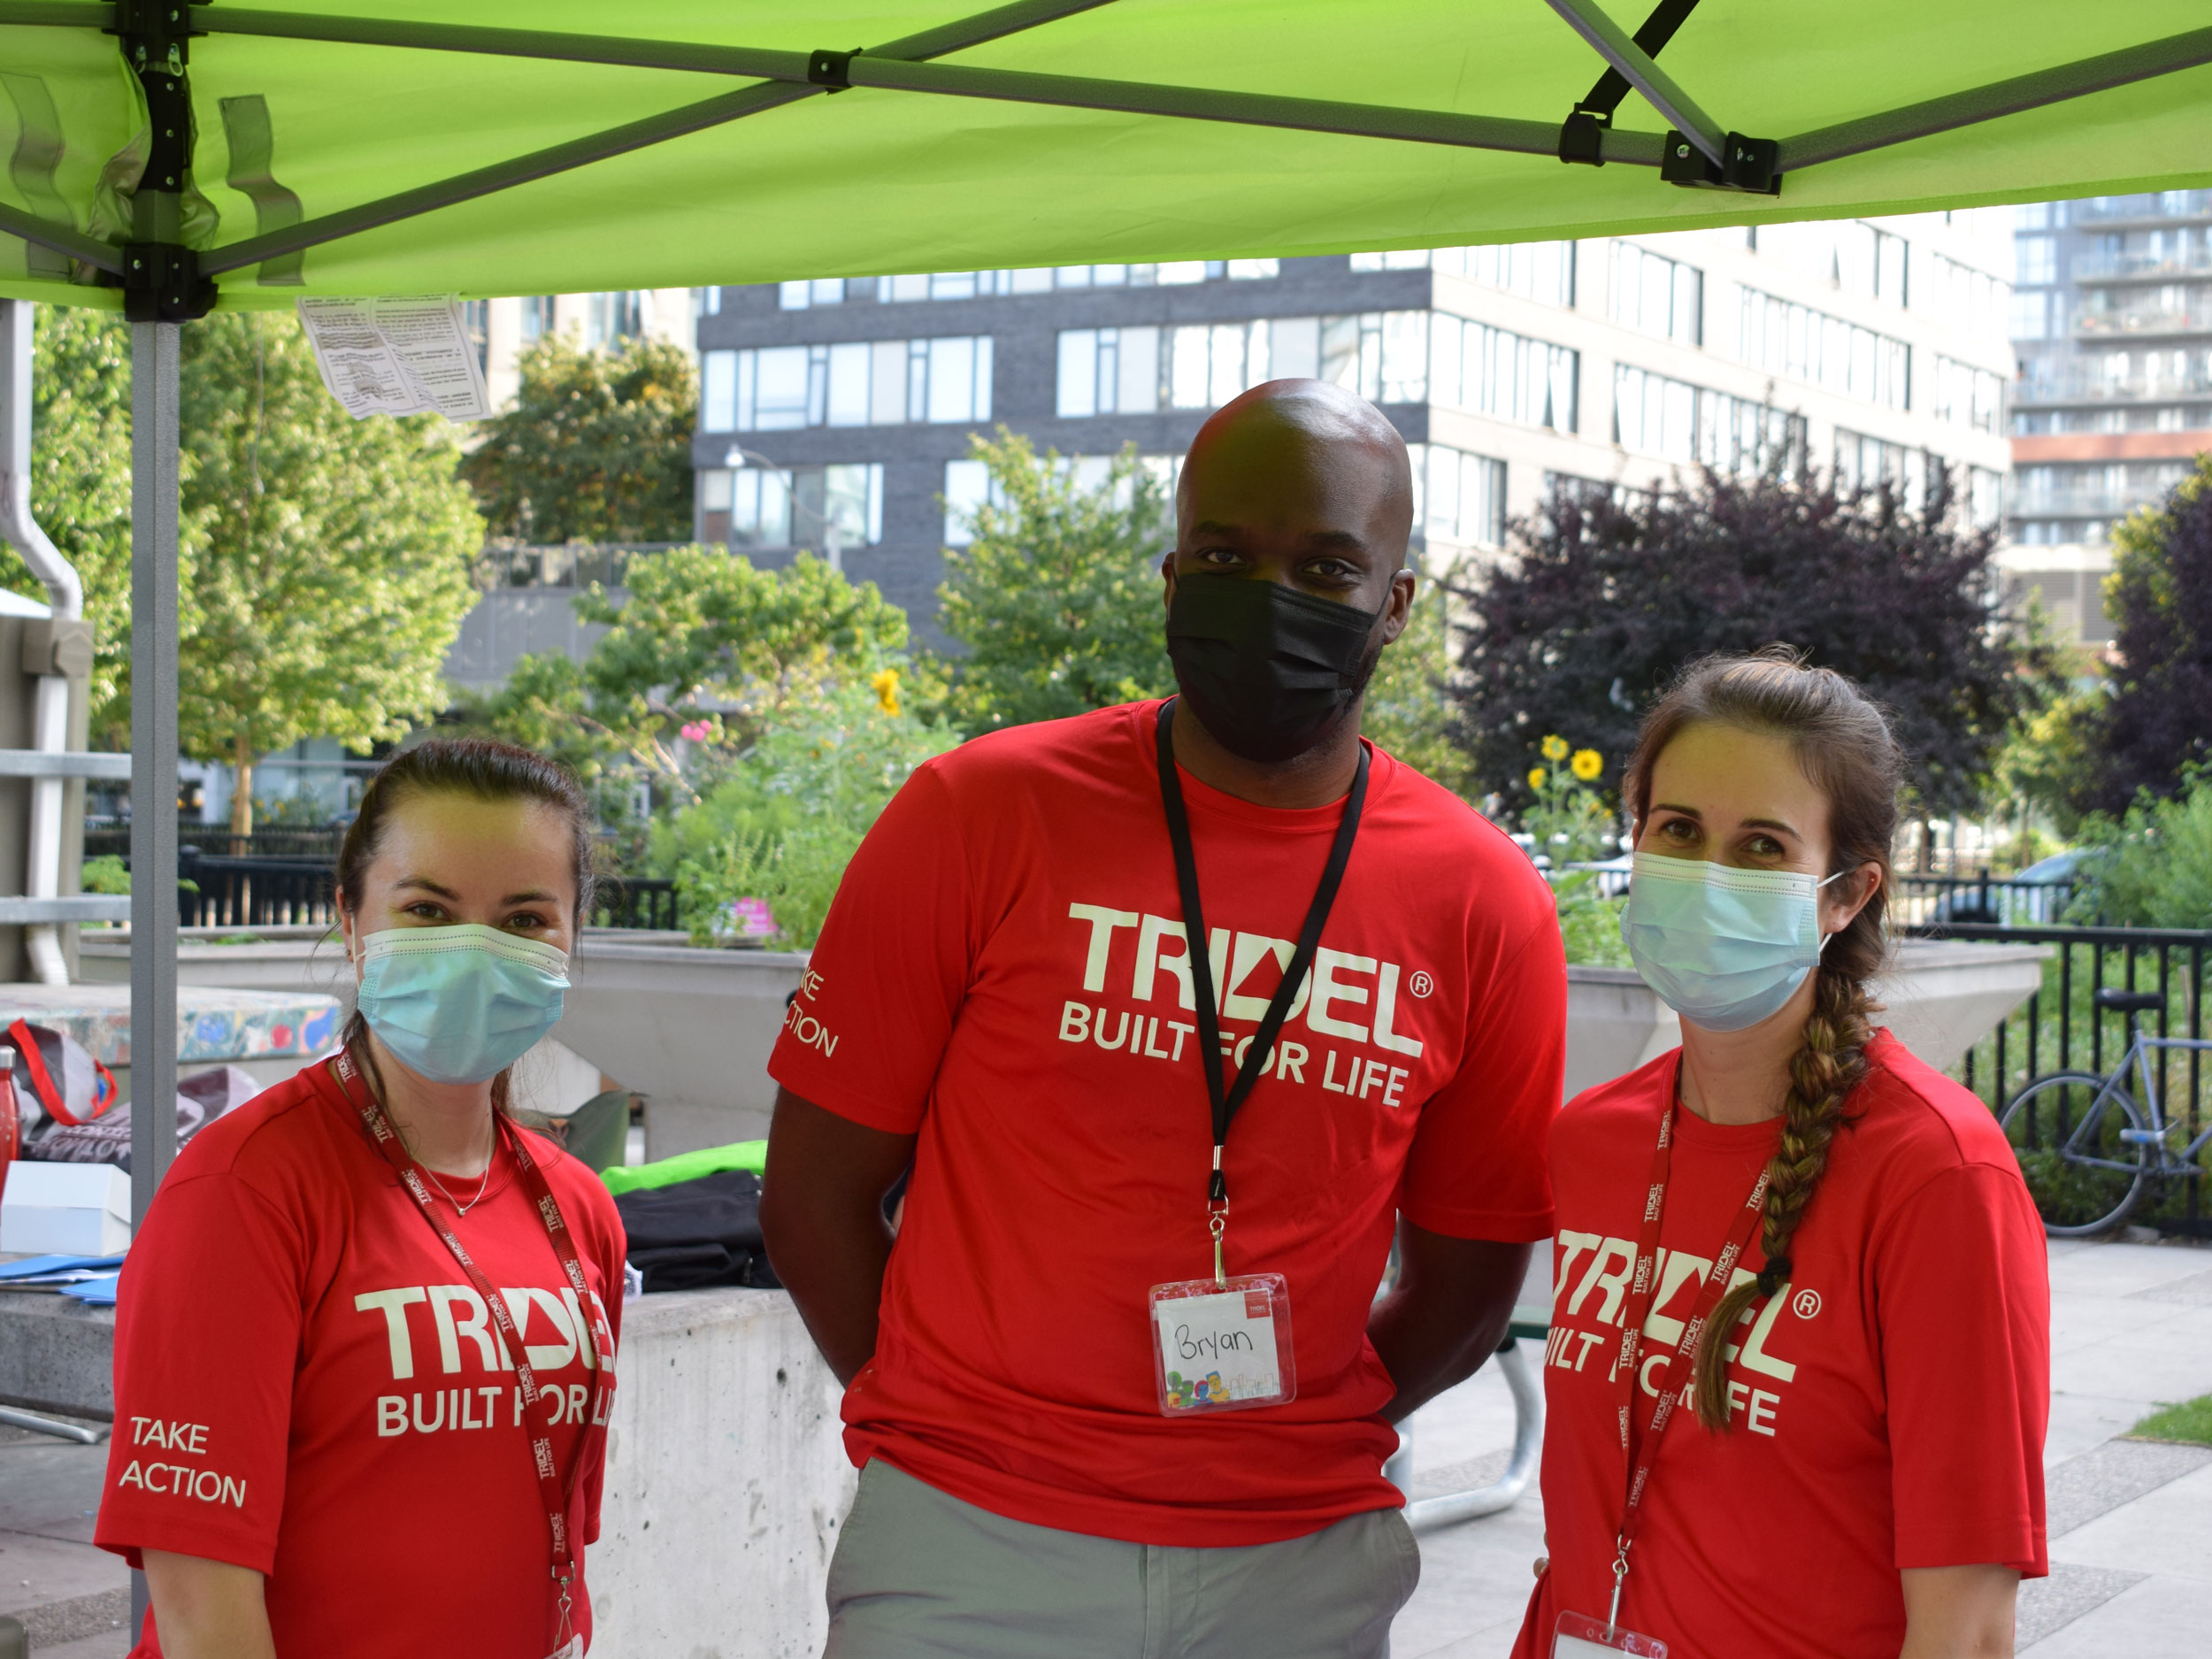 Tridel Staff at Event